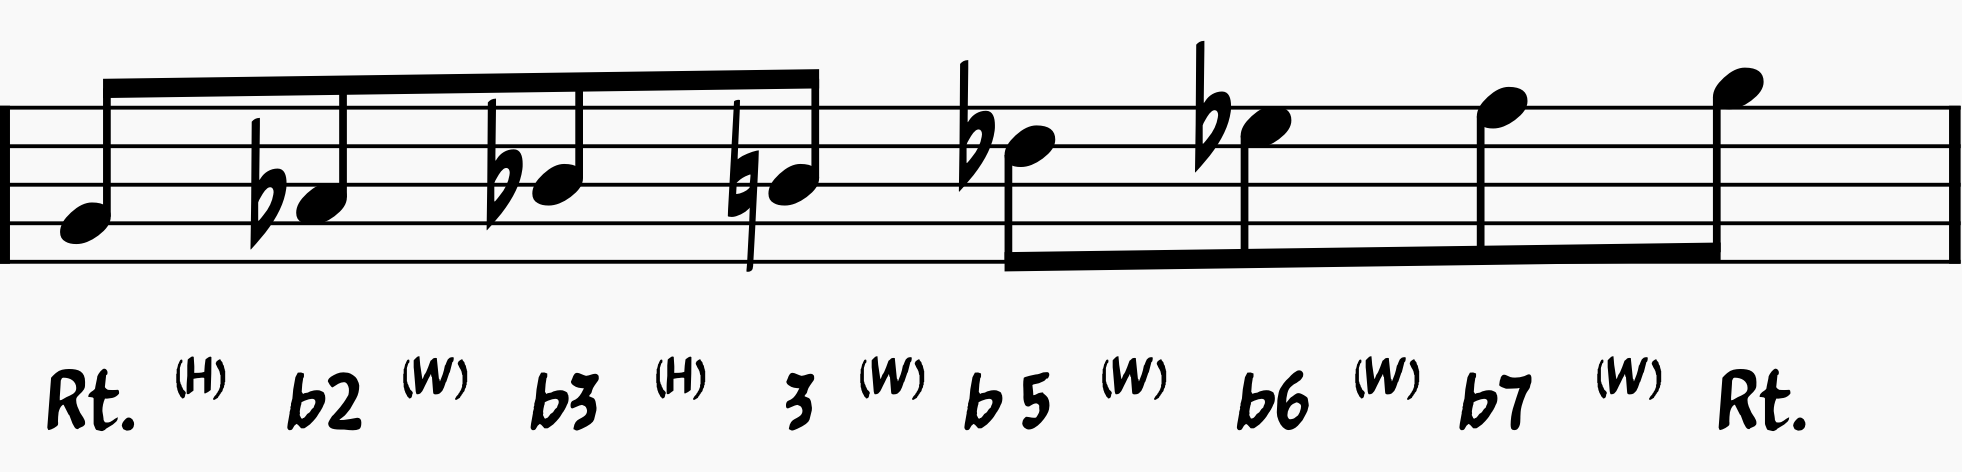 G Altered Scale with chord tones and steps